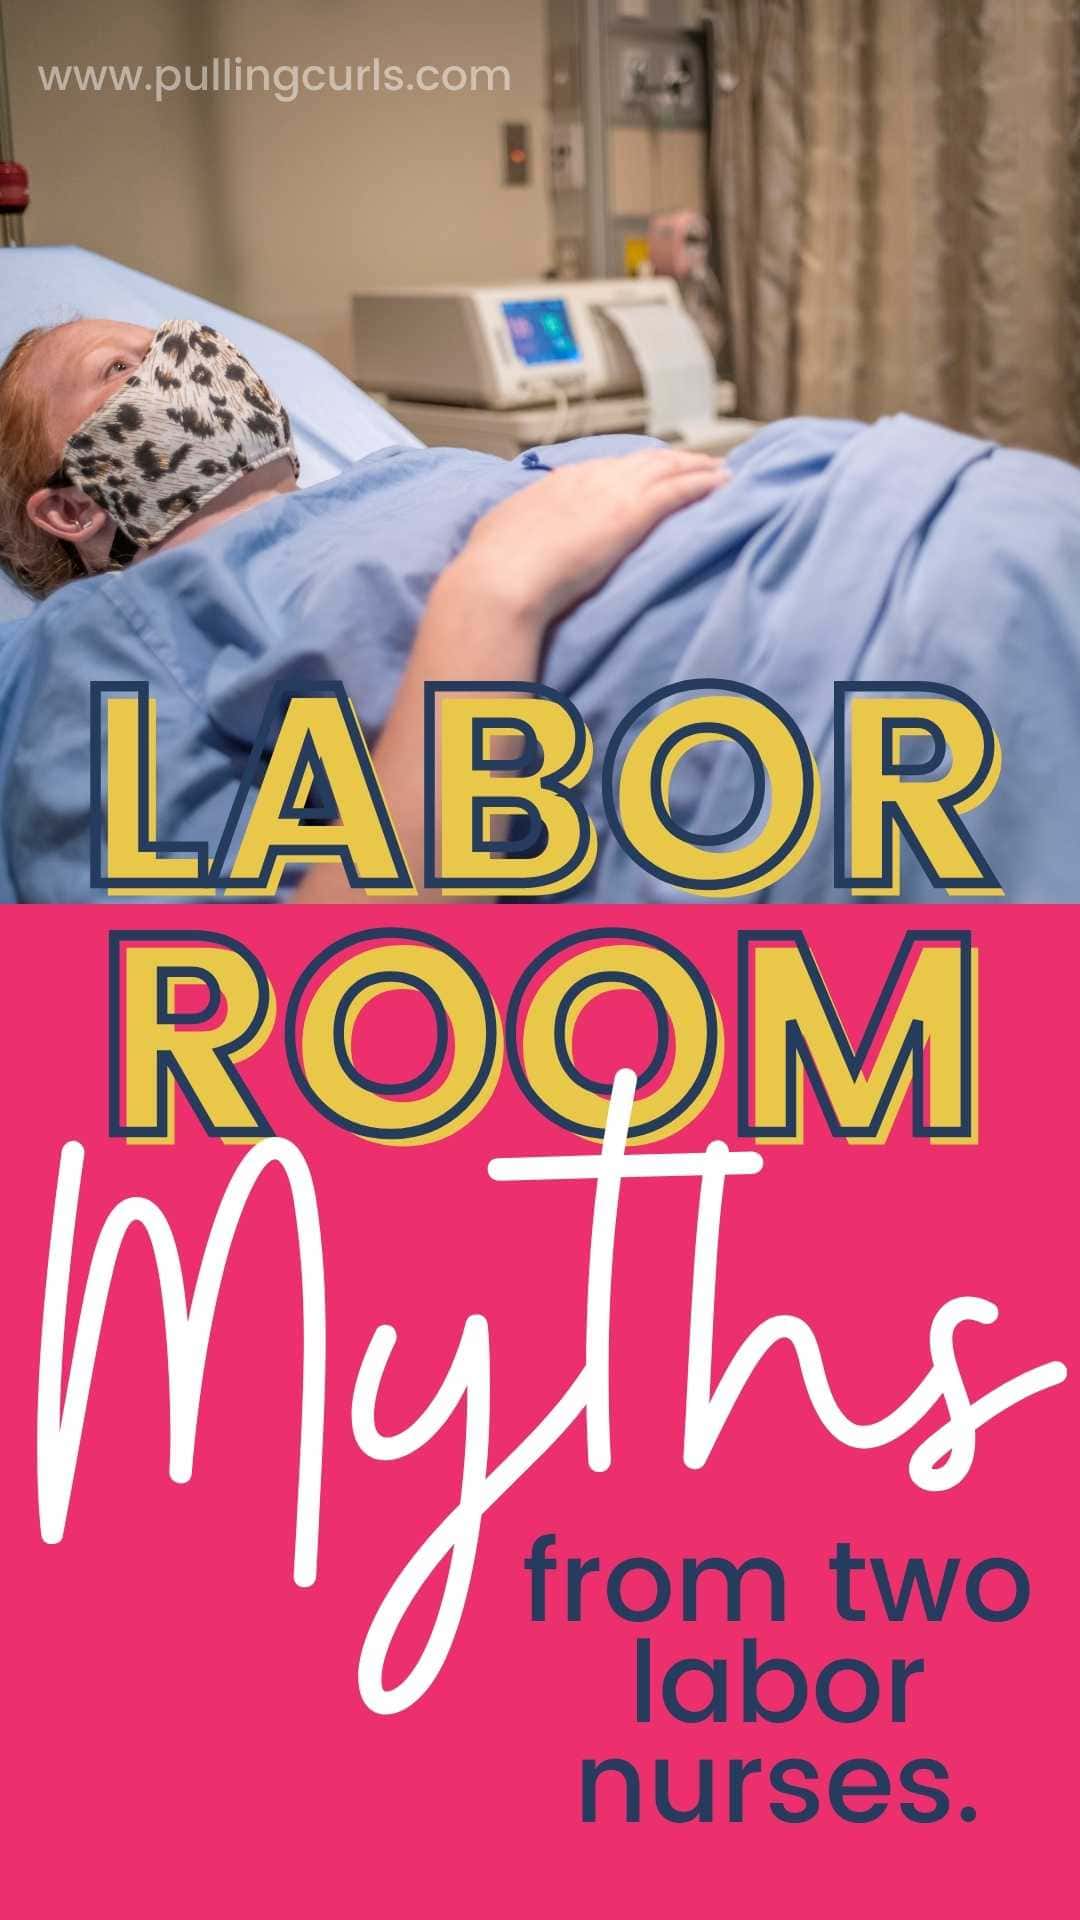 Today we're talking about some of the most POPULAR myths from the labor room. via @pullingcurls